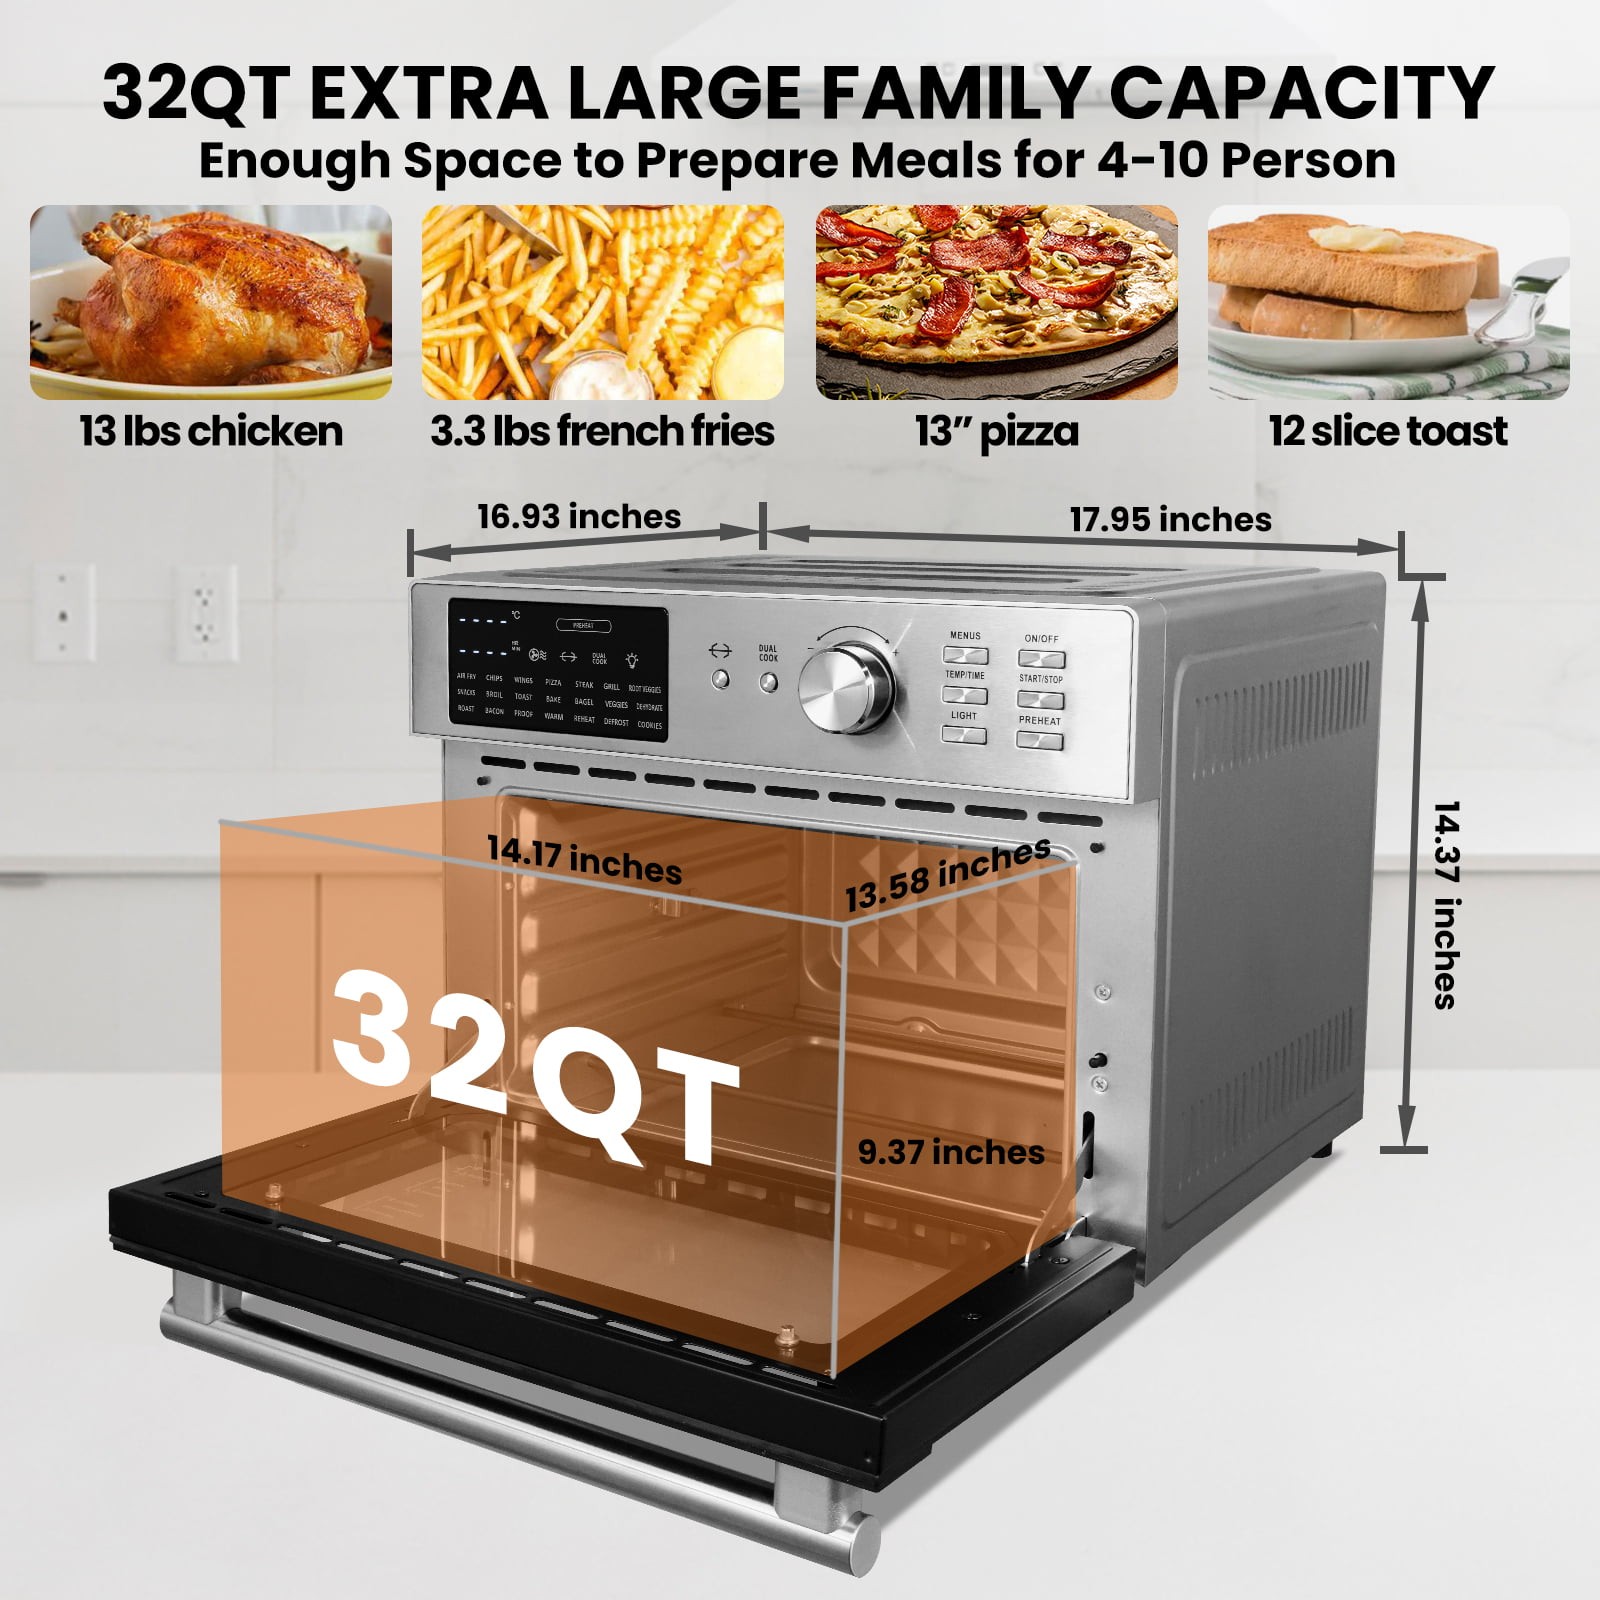 Mejores ofertas e historial de precios de 𝓞𝓘𝓜𝓘𝓢 Air Fryer Toaster Oven,  32QT Large 21 in 1 Smart Convection oven Countertop, with Rotisserie and  Dehydrator,1800W in Stainless Steel, Silver en